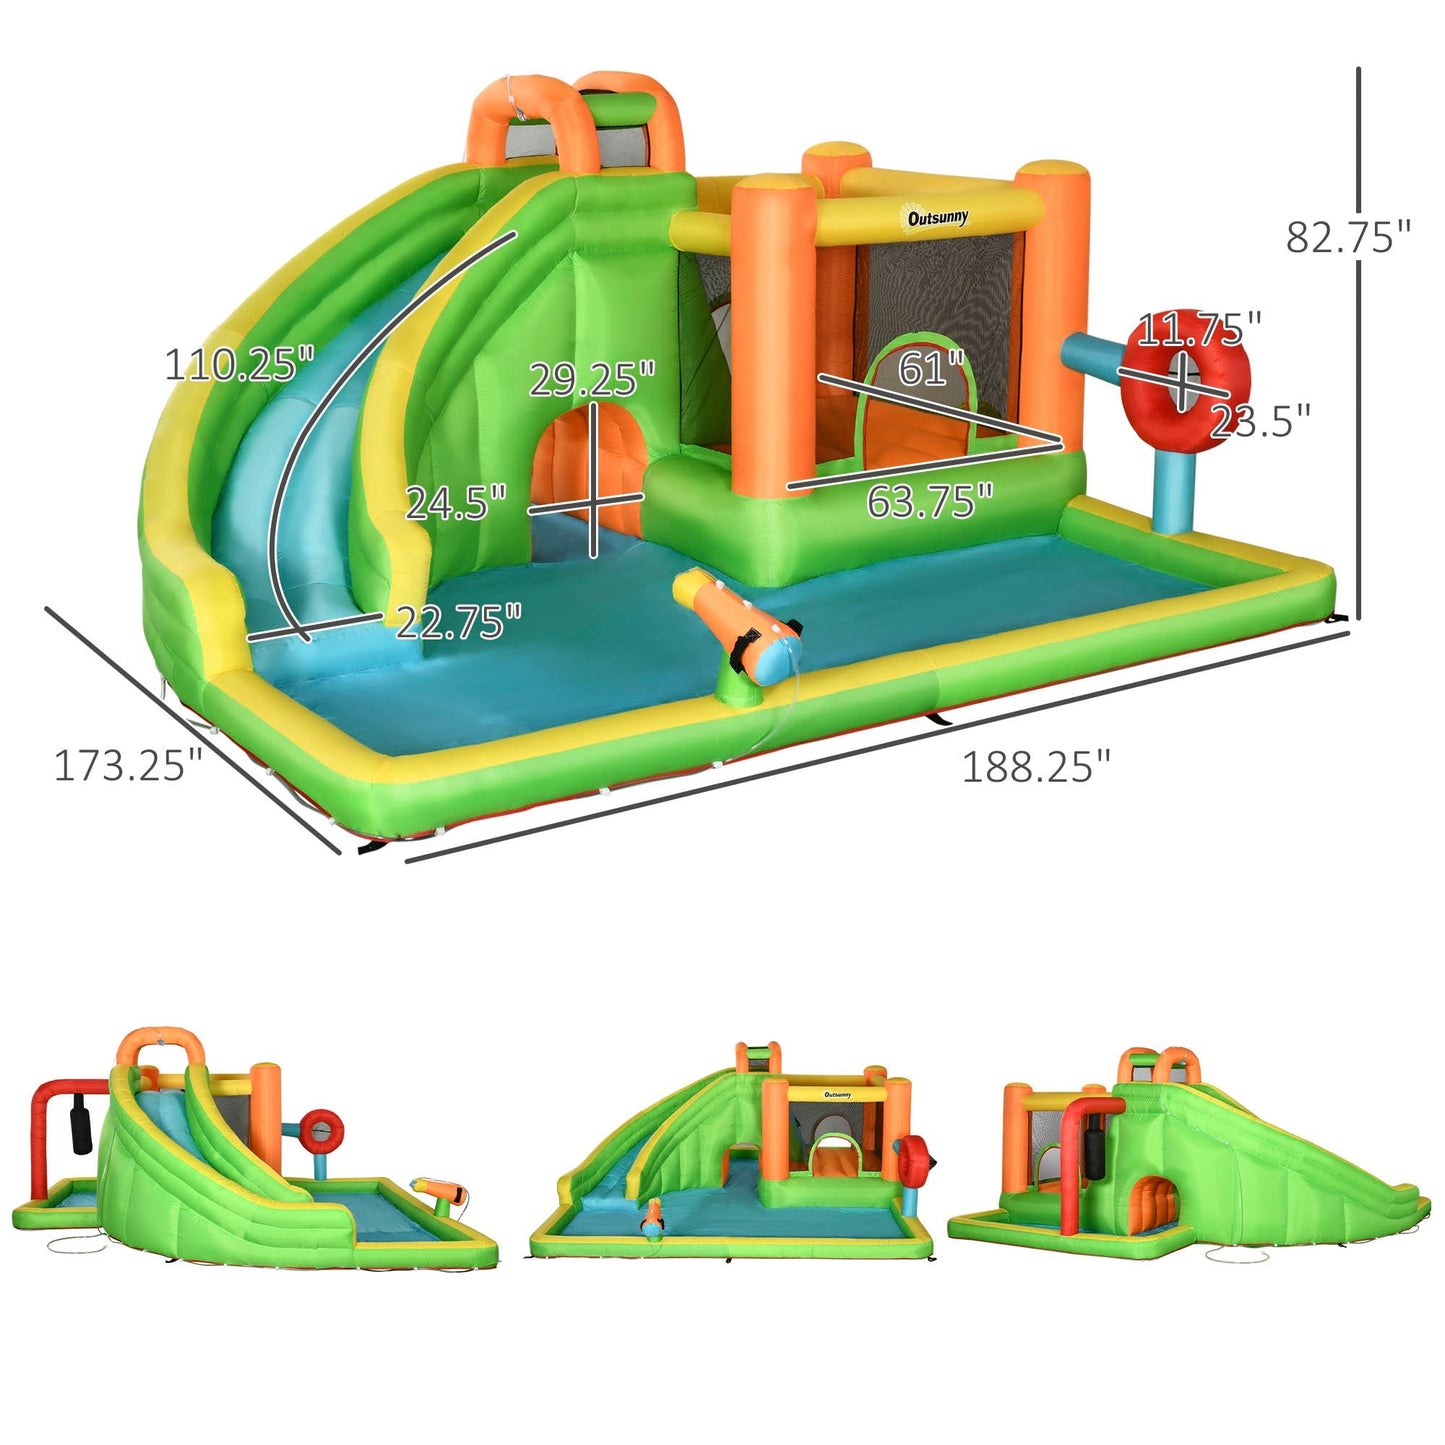 Miscellaneous-7-in-1 Inflatable Water Slide, Kids Castle Bounce House Includes Slide, trampoline, Pool, Ball-target, Boxing Post, Tunnel, 750W Air Blower - Outdoor Style Company